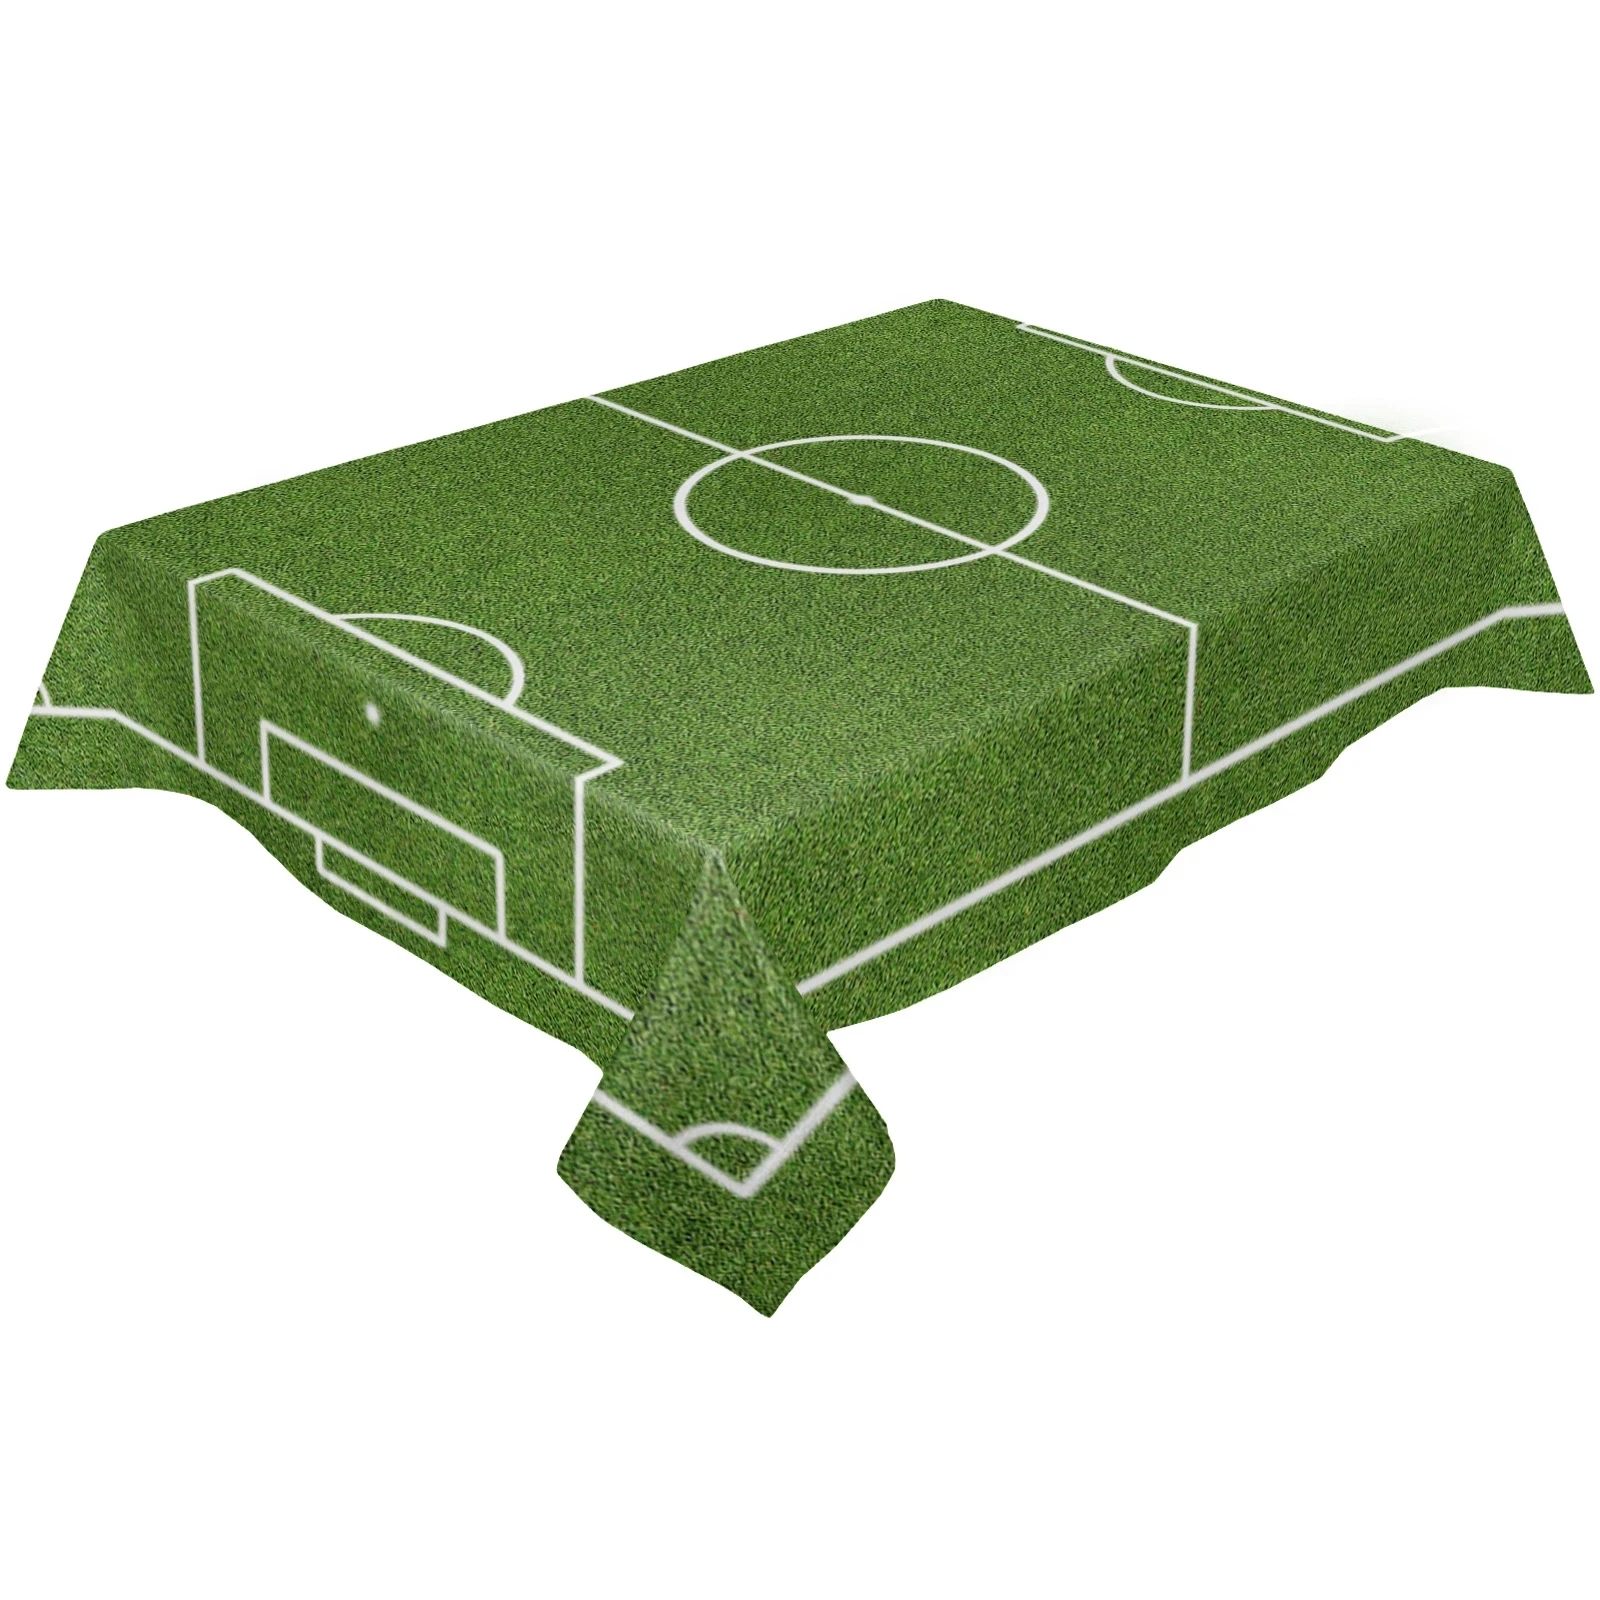 Soccer Balls Football Field Rectangular Tablecloth Table Decor Waterproof Table Cover for Kitchen Party Wedding Decorative